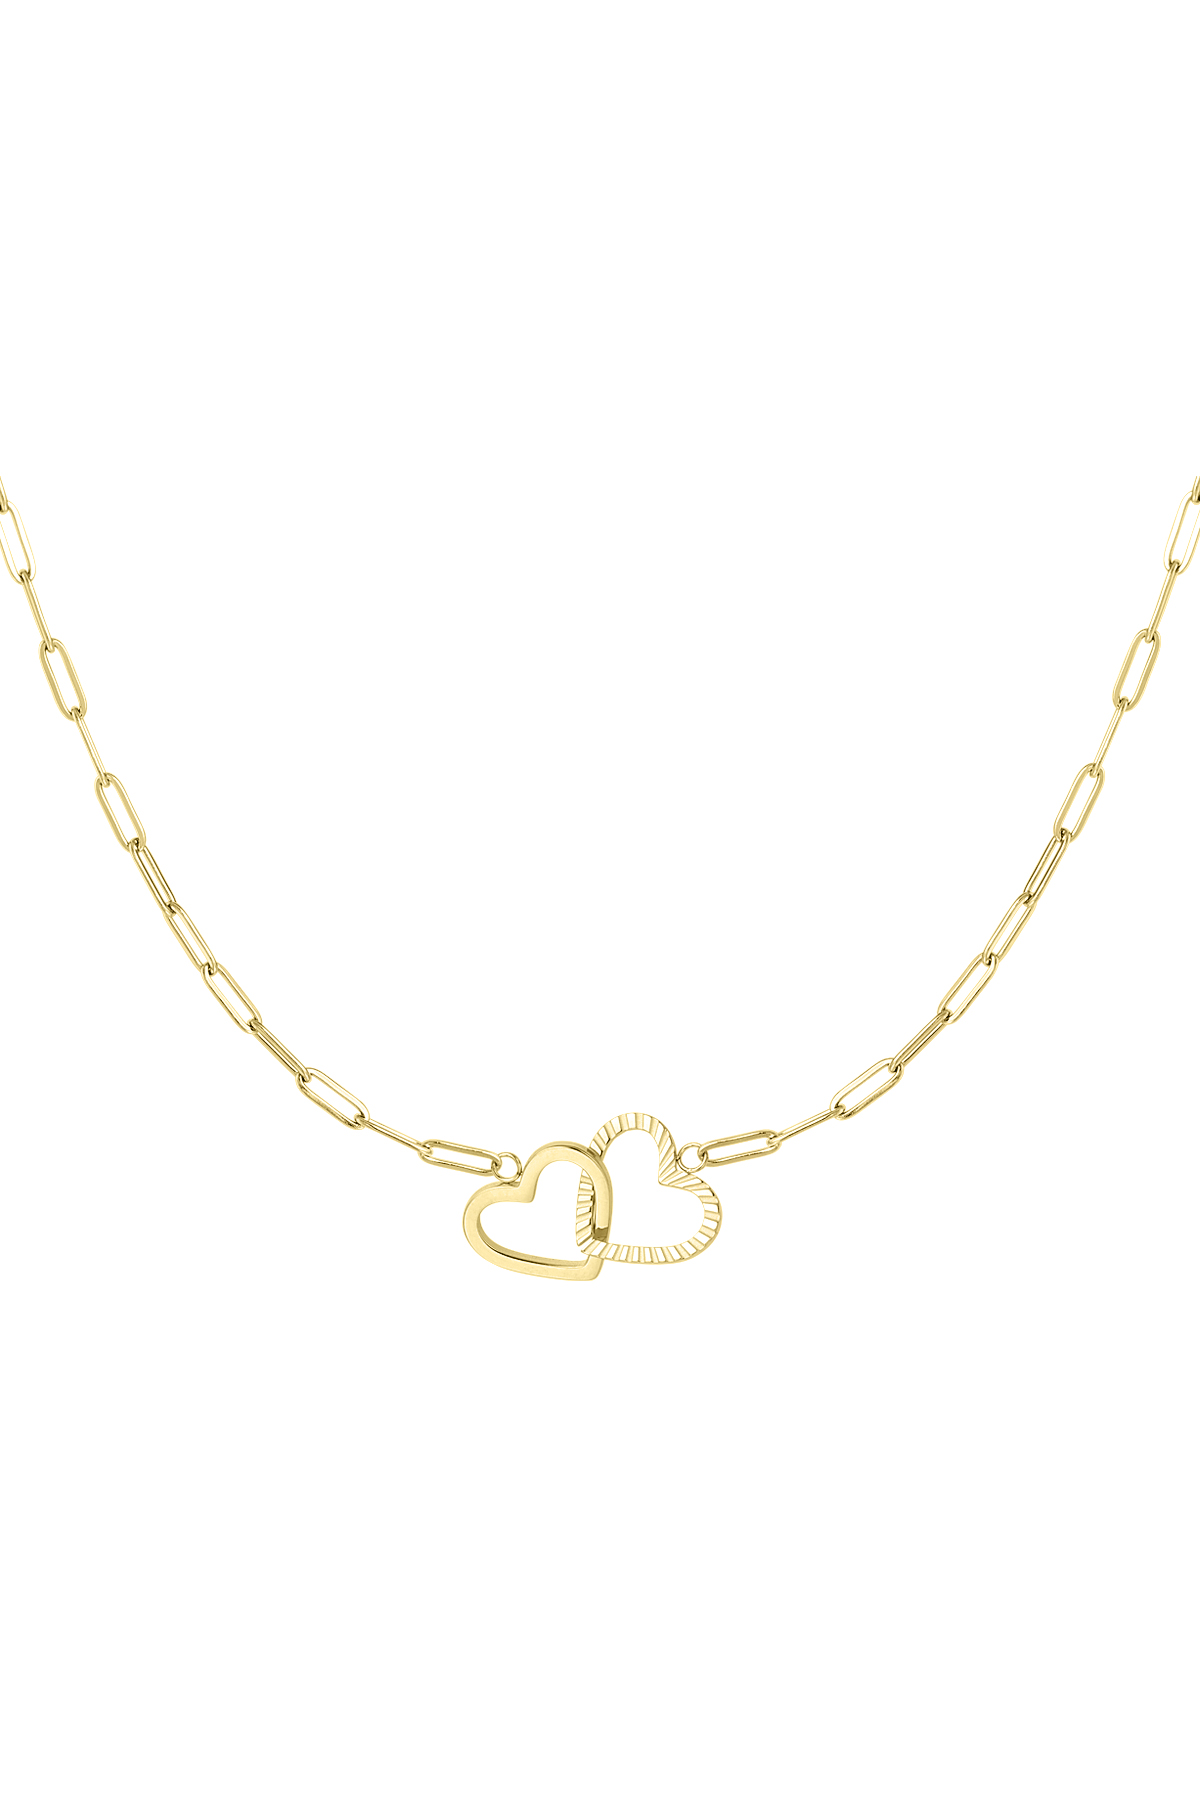 Necklace linked hearts - gold Stainless Steel